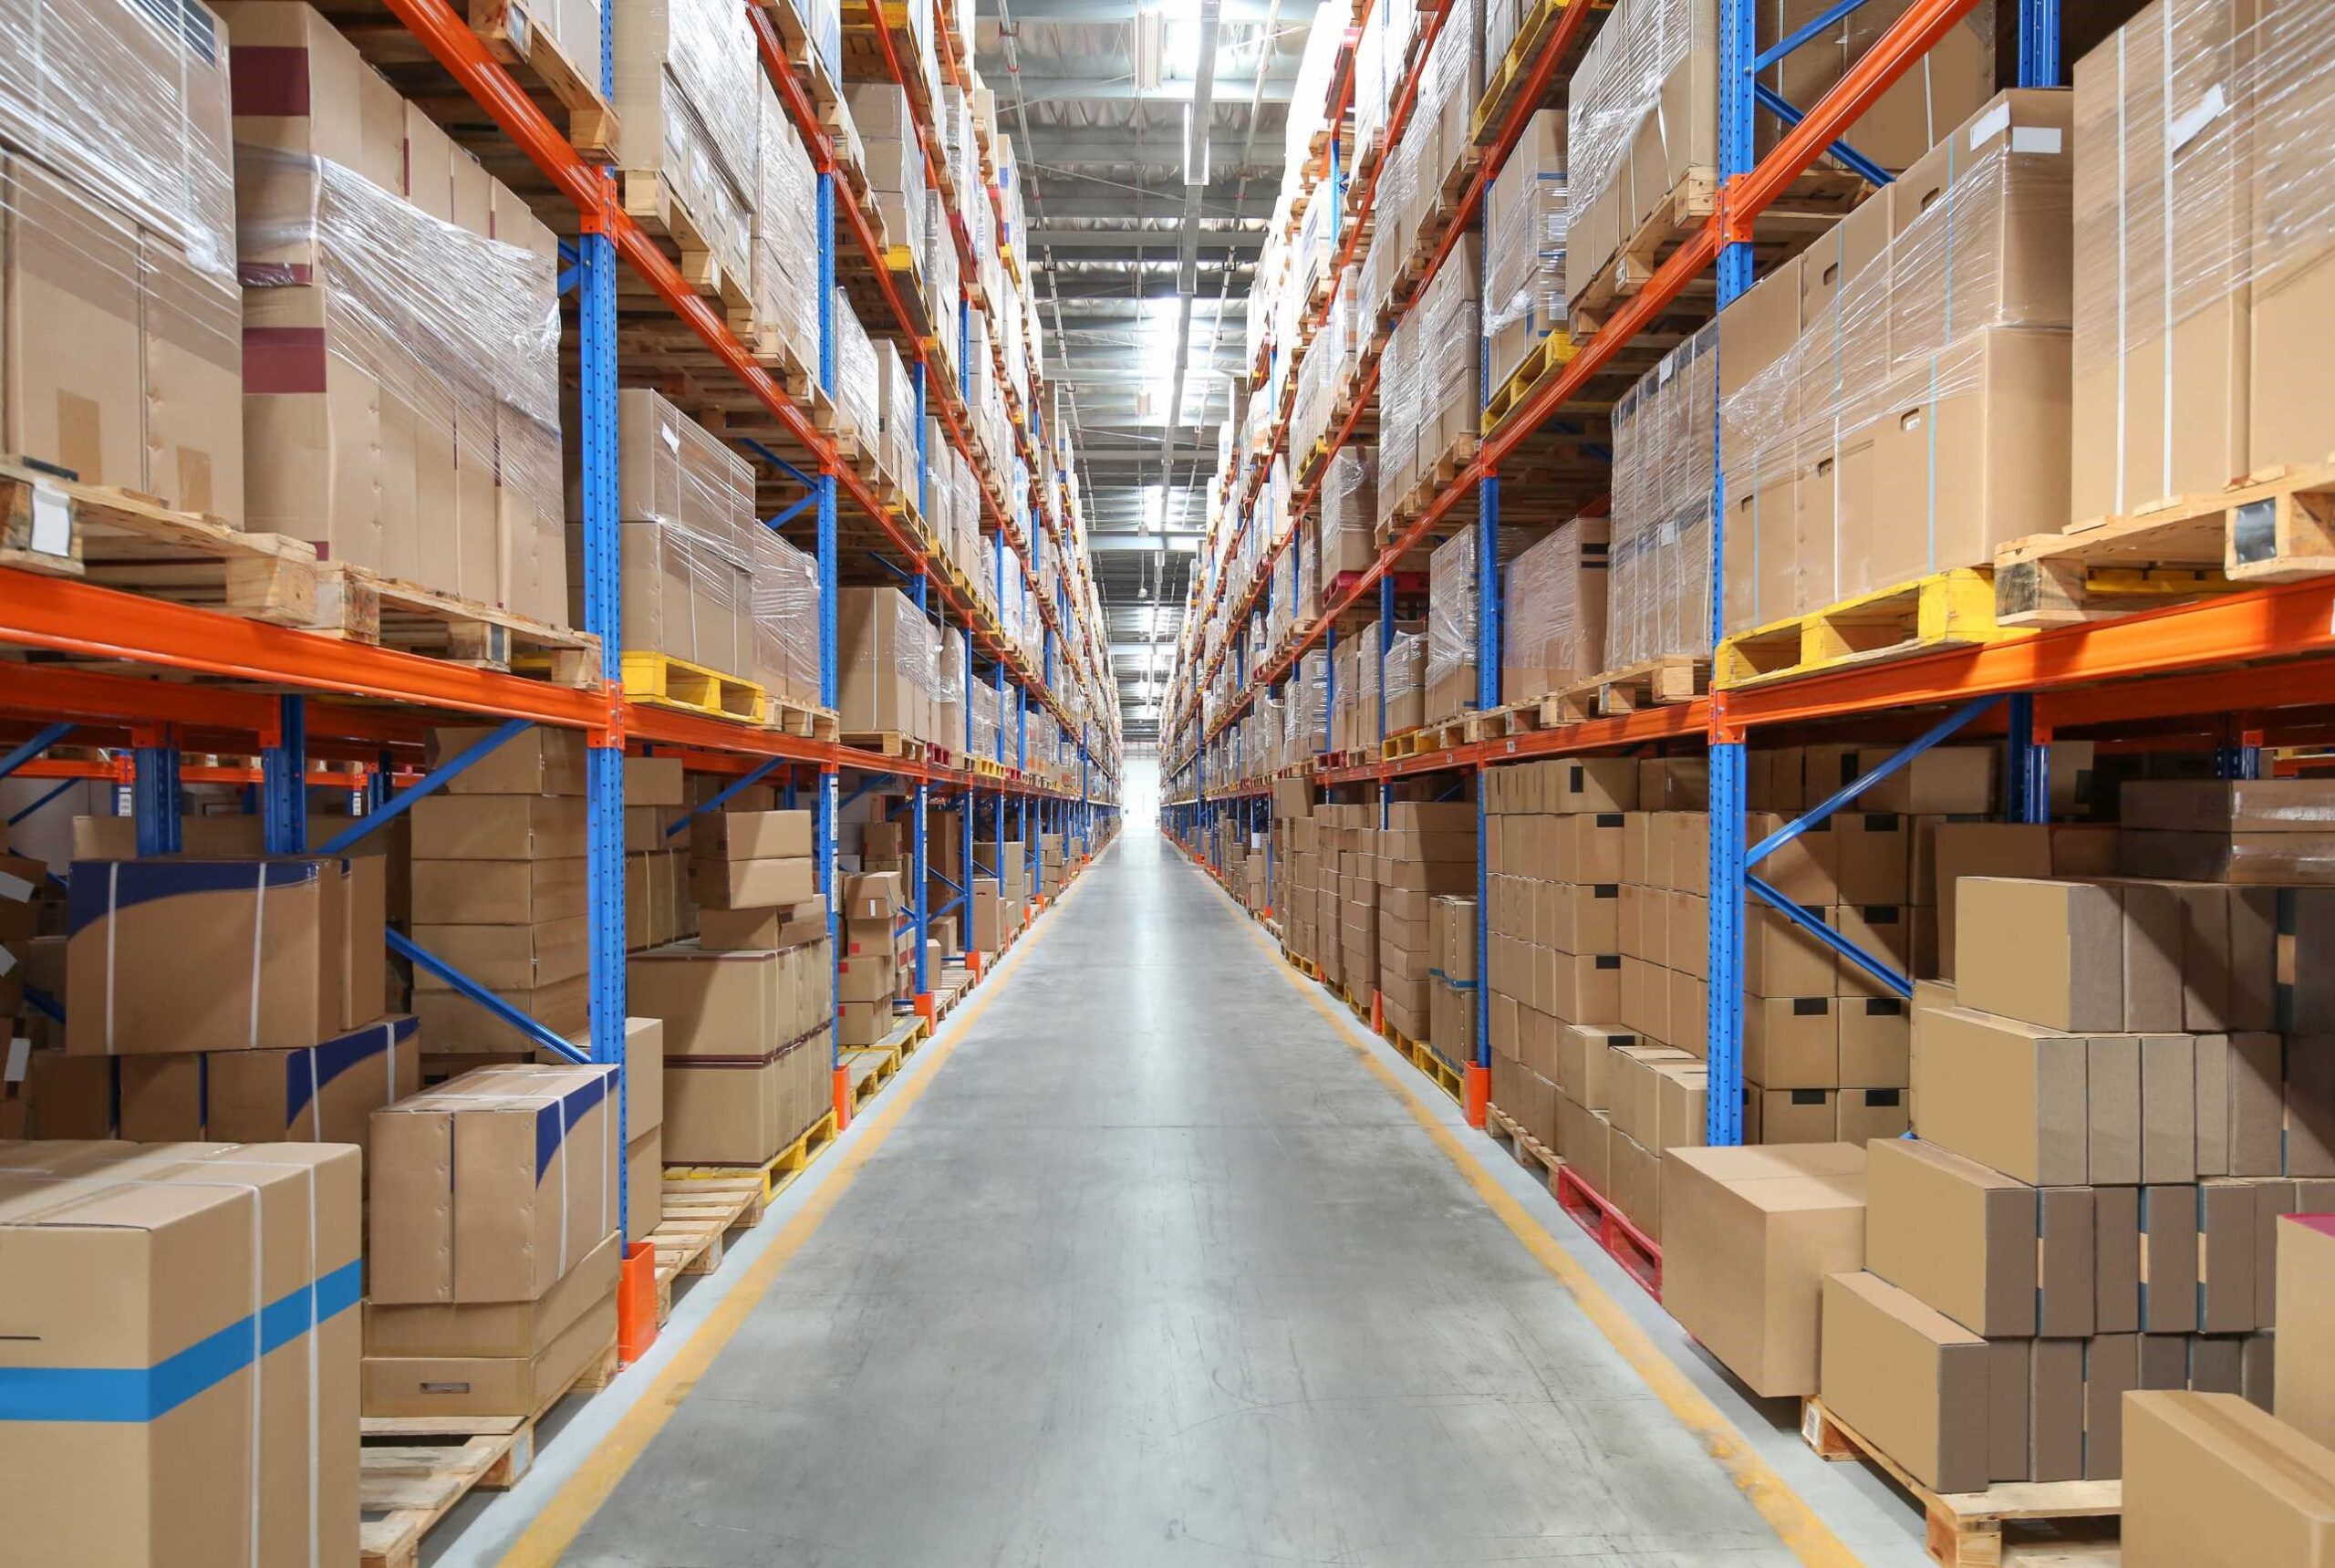 What To Expect When Renting Our Storage Space for Your Business: An Ultimate Guide